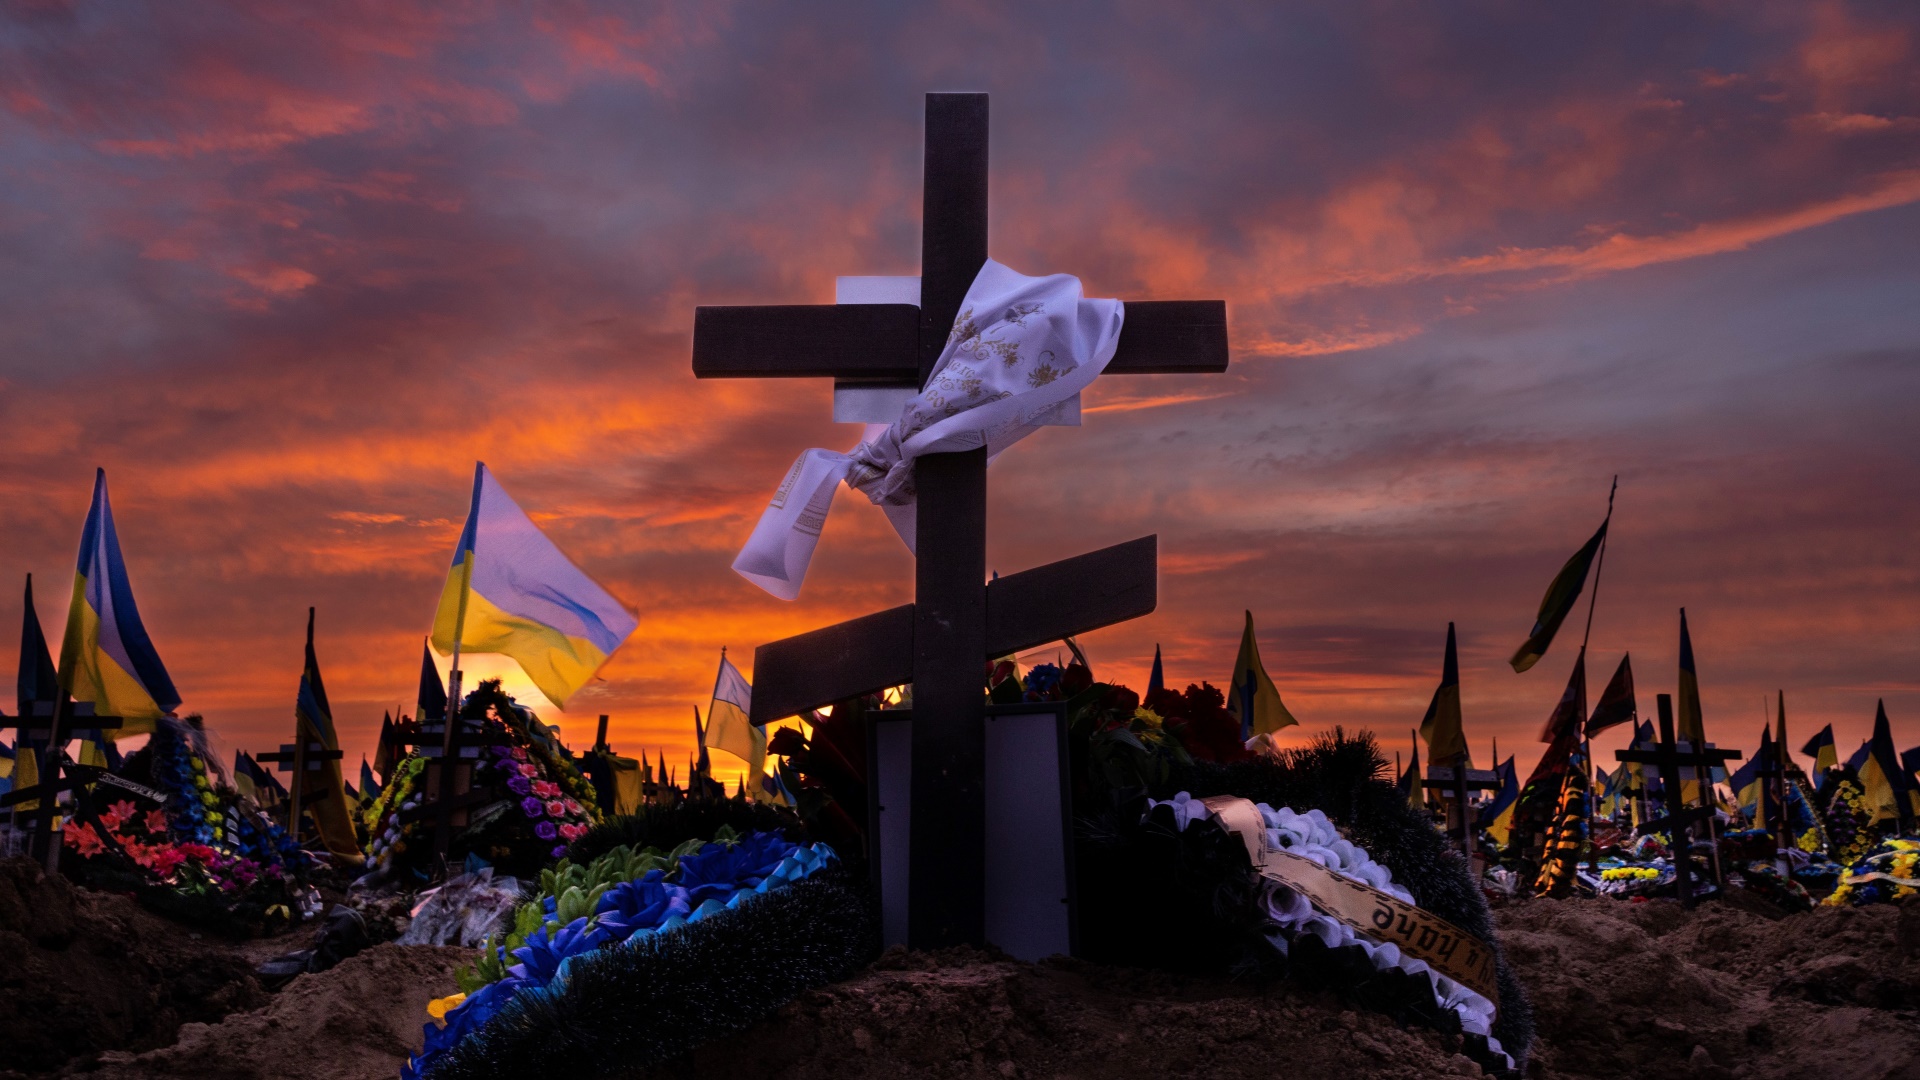 A colourful sunset over military graves in Kharkiv cemetery, Ukraine, in March. The military section of this large graveyard is almost full as many soldiers fighting in the war come from the city. Photo: Paula Bronstein /Getty